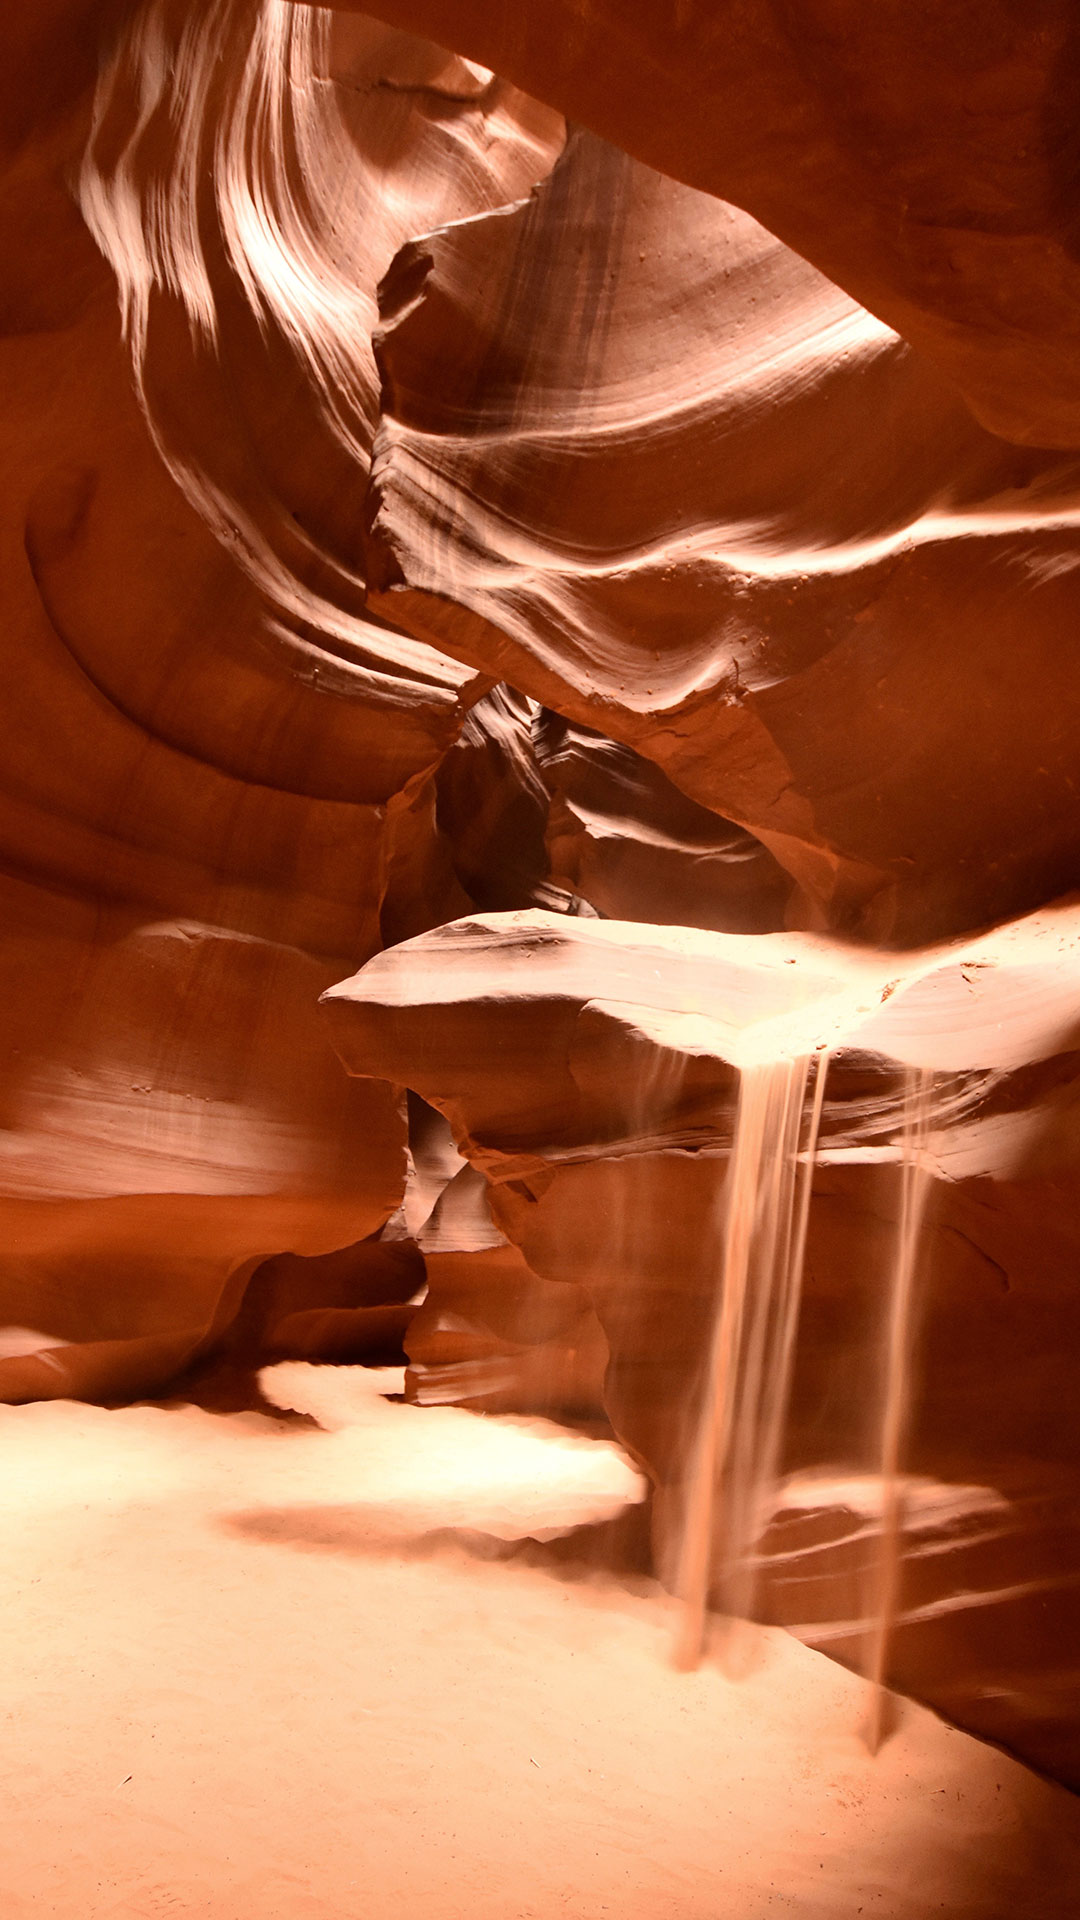 Sand Pouring Down A Cave relaxing wallpaper for iPhone